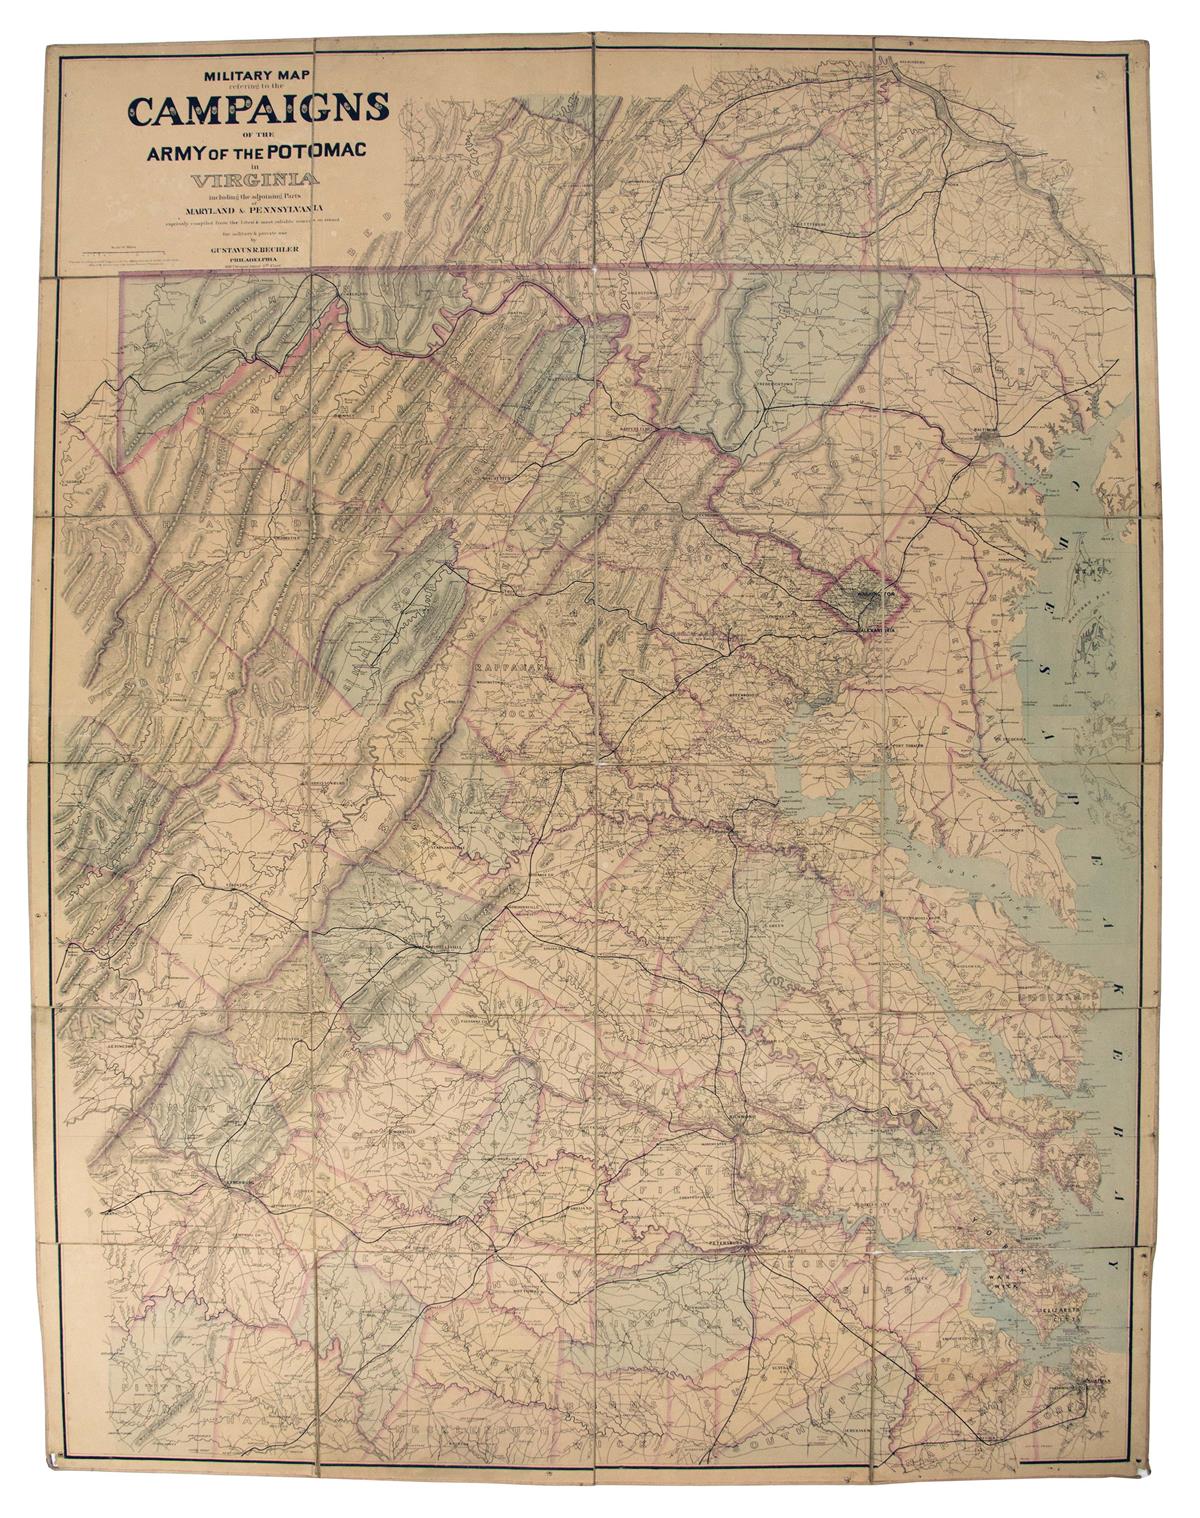 (CIVIL WAR.) Bechler, Gustavus R. Military Map Refering to the Campaigns of the Army of the Potomac in Virginia,